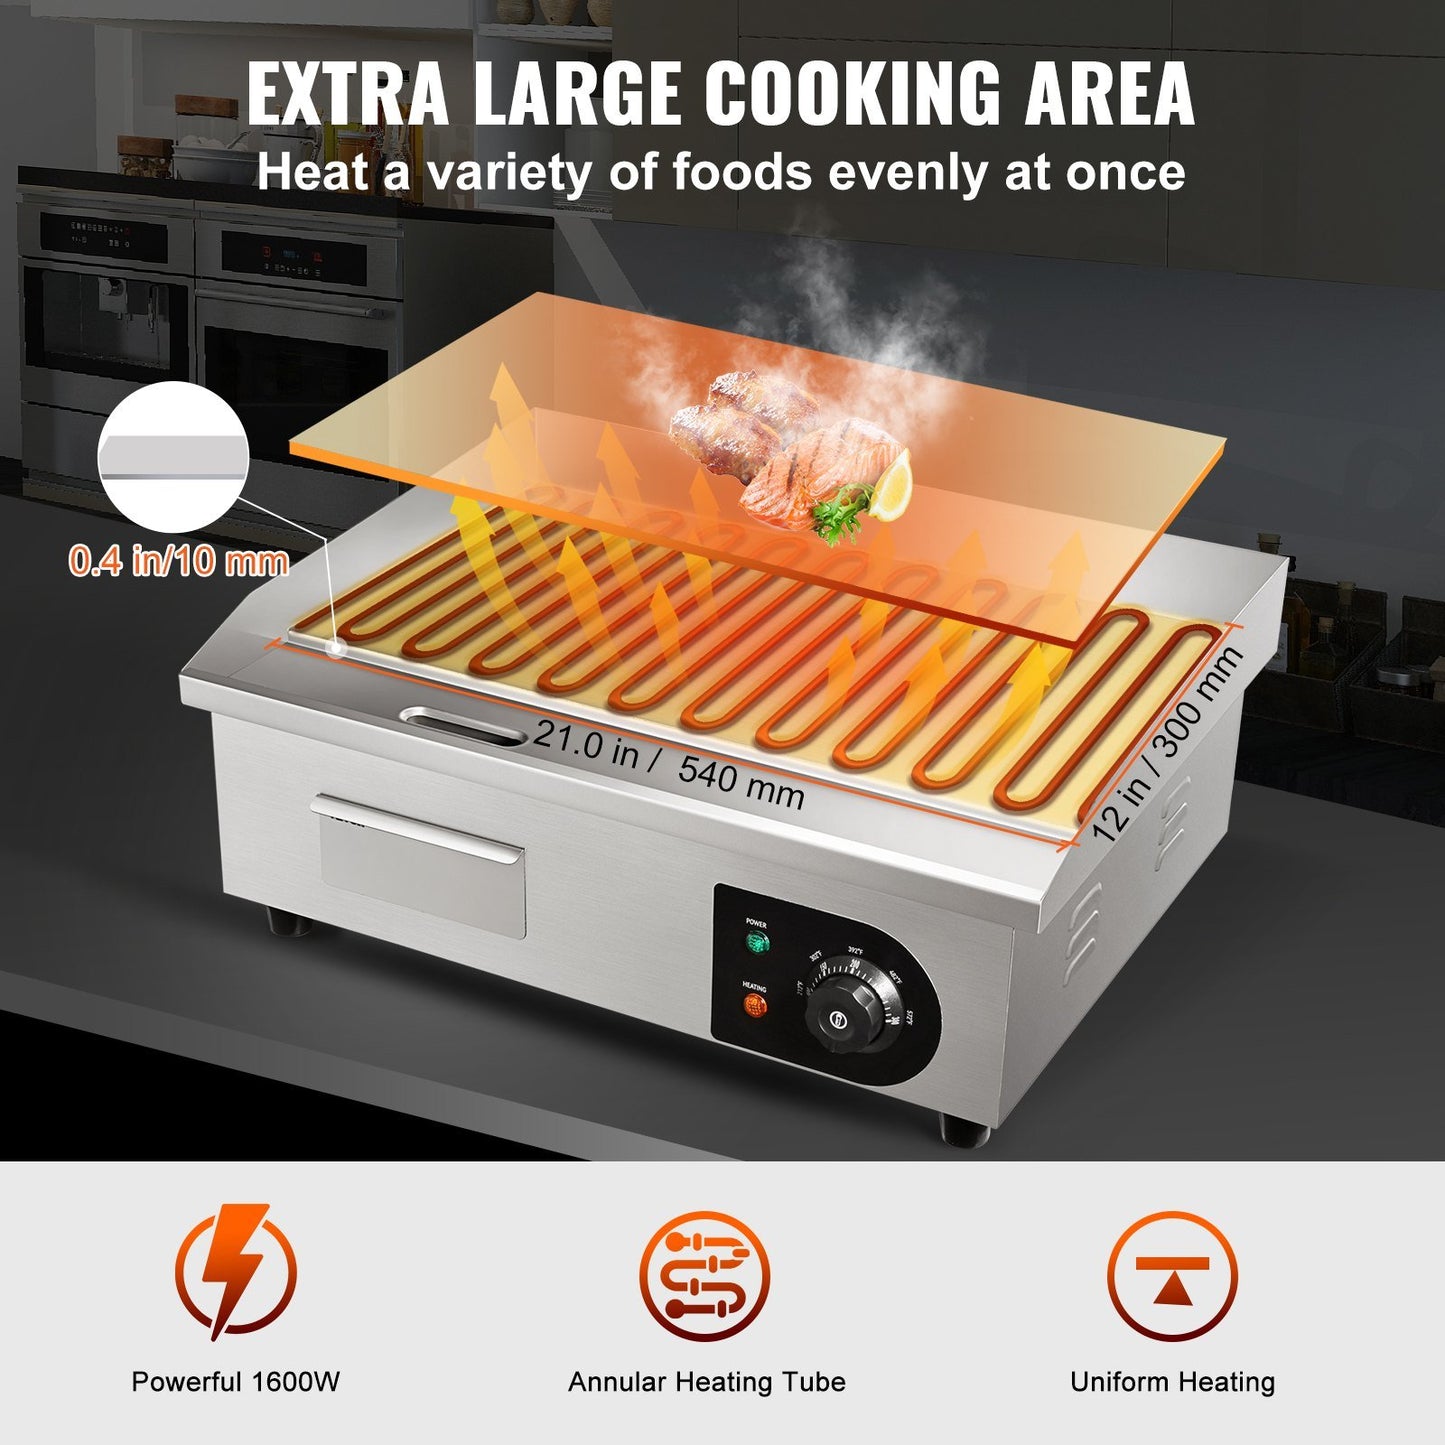 VEVOR Commercial Electric Griddle, 21", 1600W Countertop Flat Top Grill, Stainless Steel Teppanyaki Grill, 122-572 degree Fahrenheit Adjustable Temp Control 2 Shovels & Brushes,